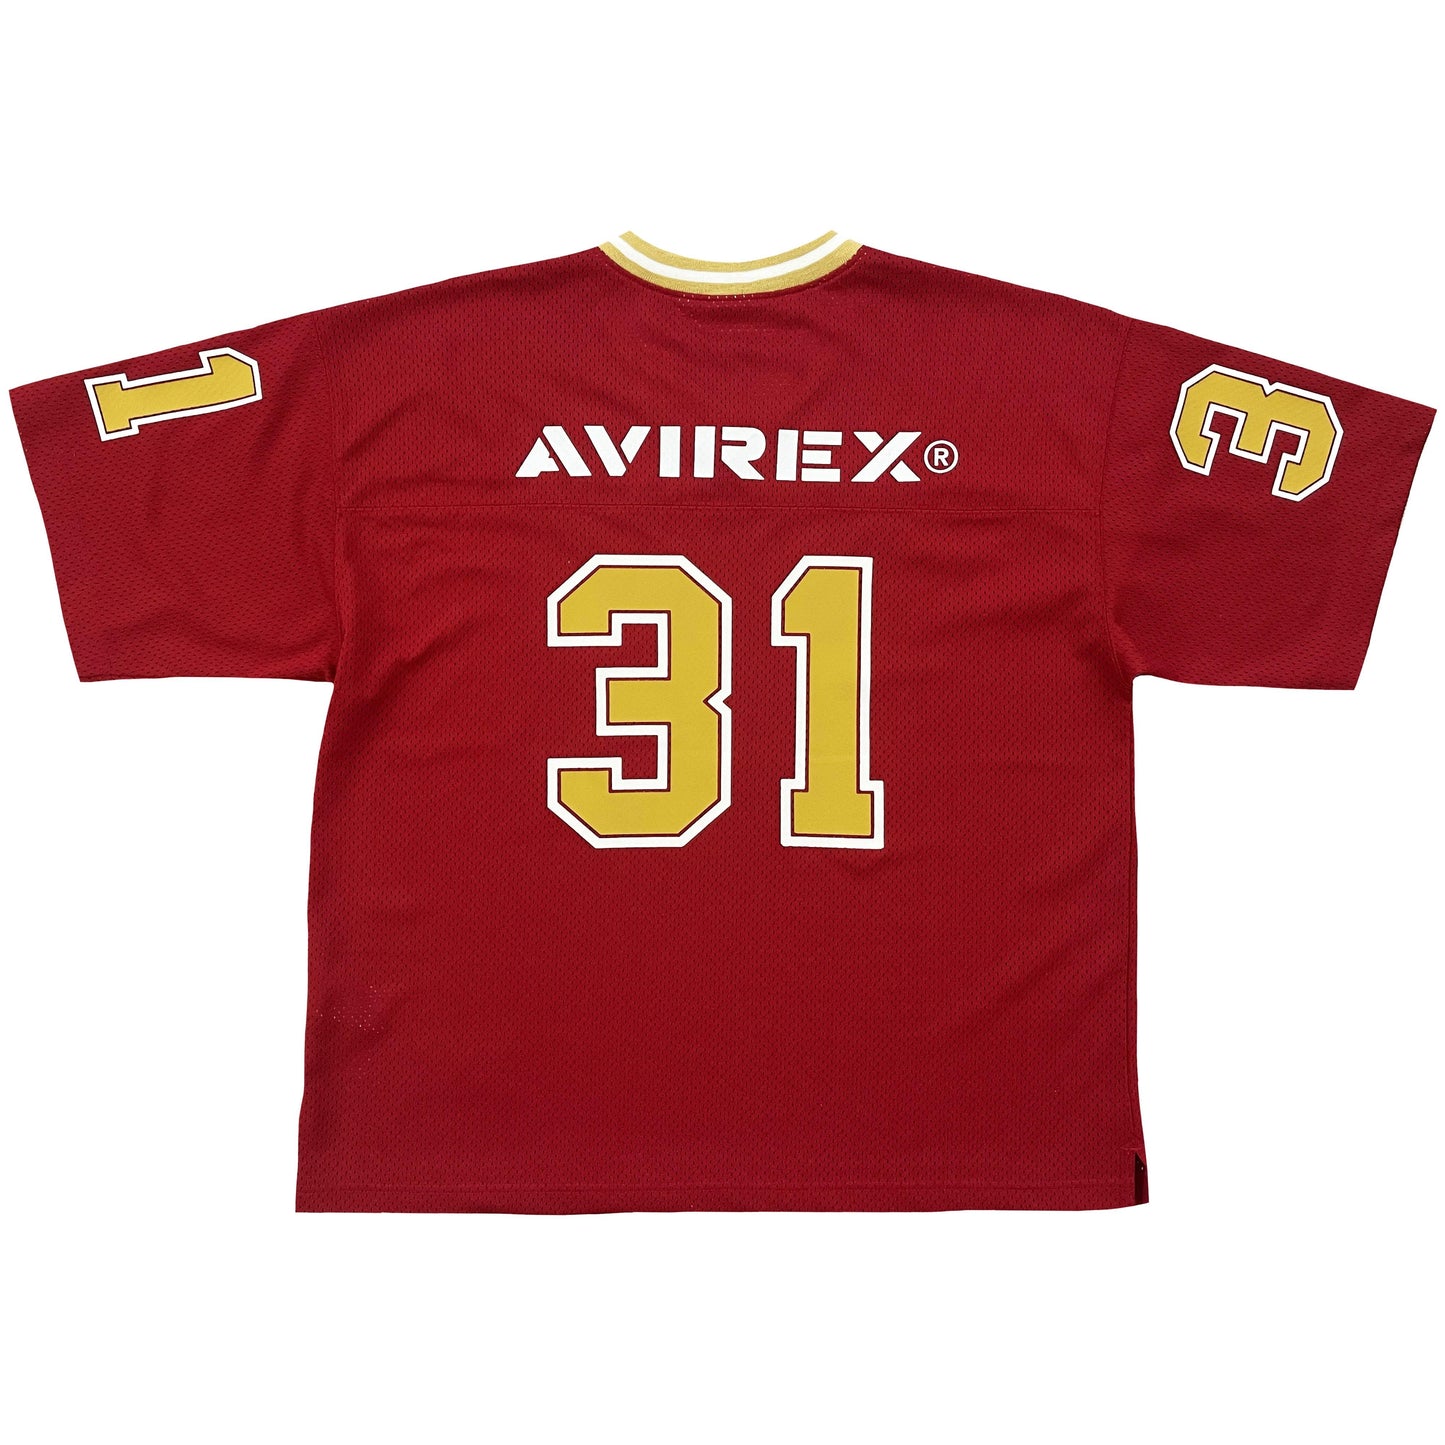 Avirex American Football Jersey - Known Source